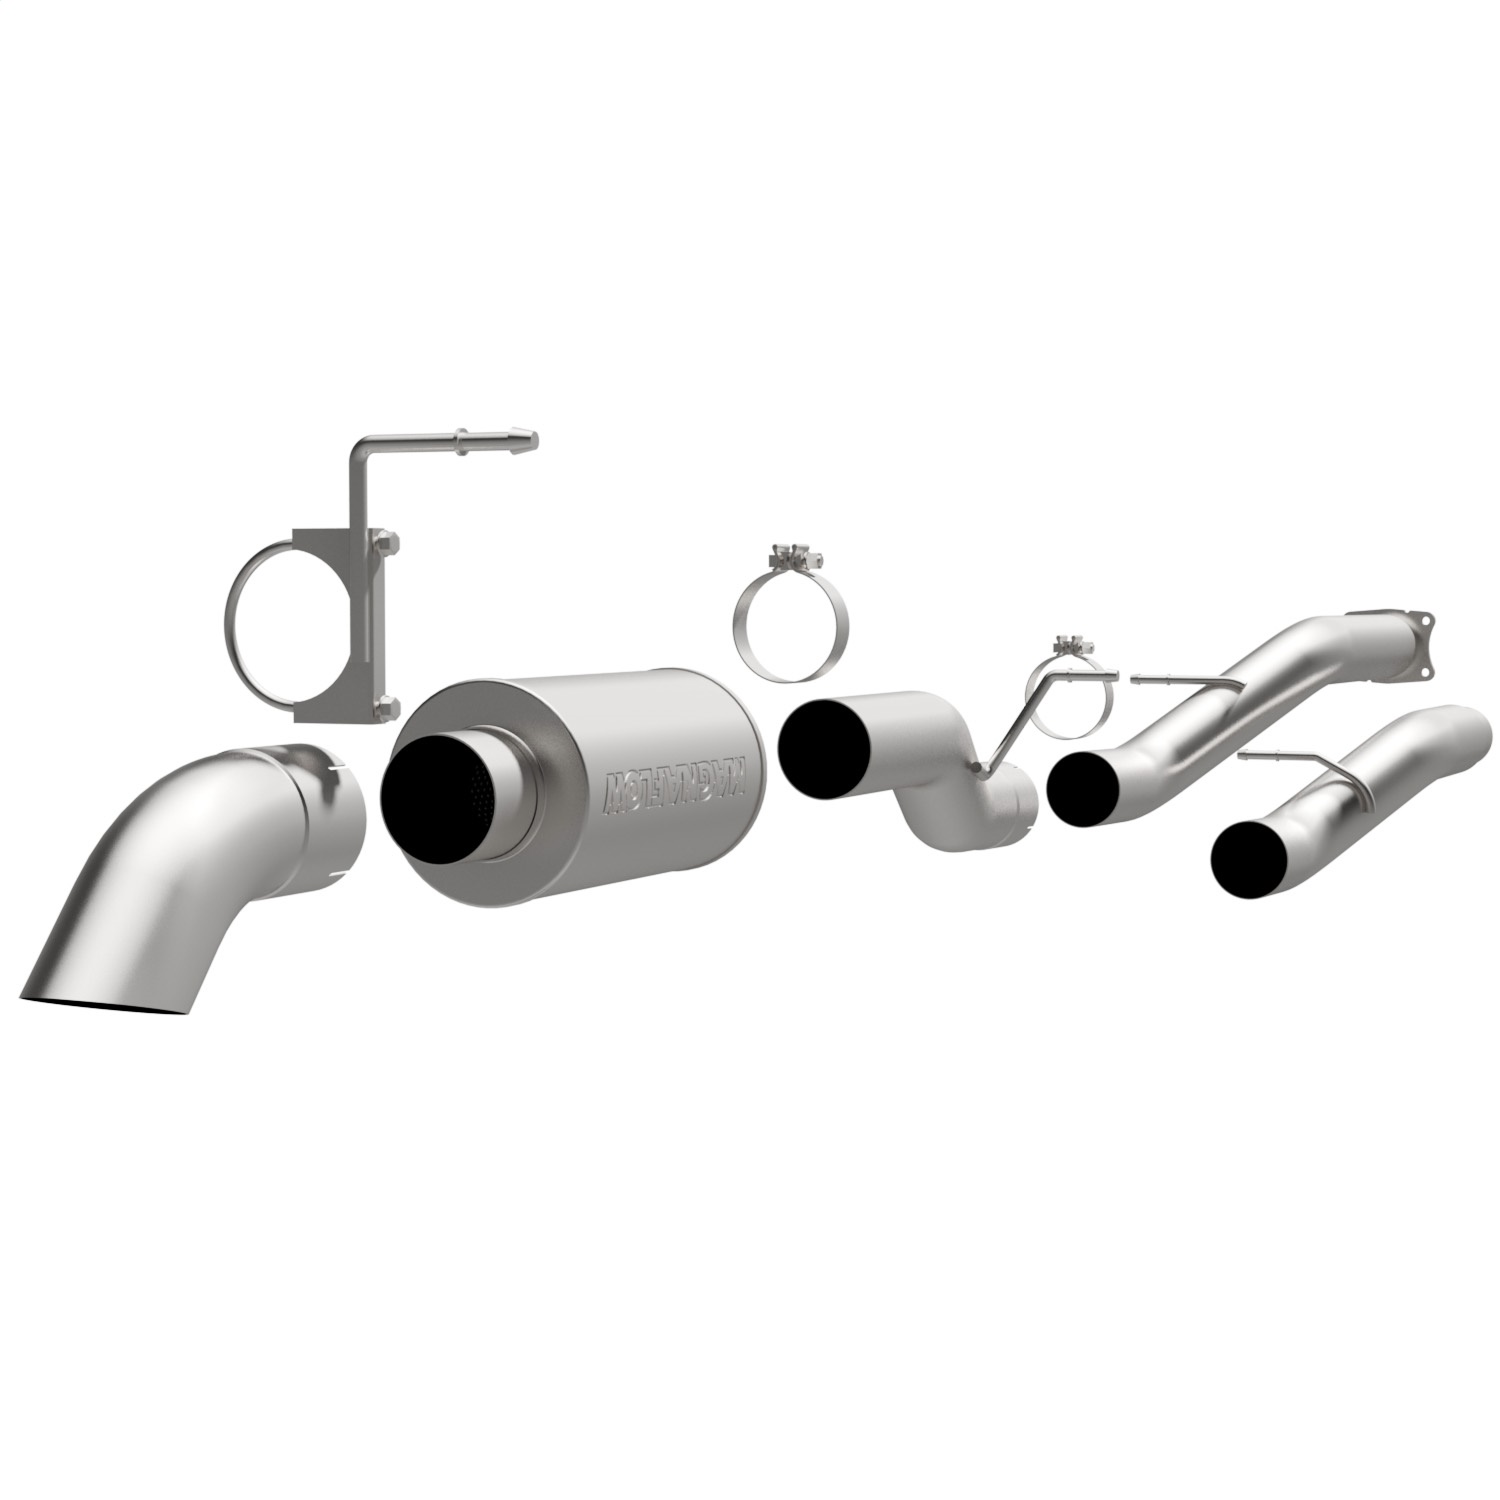 Magnaflow Performance Exhaust Magnaflow Performance Exhaust 17128 Off Road Pro Series Cat-Back System